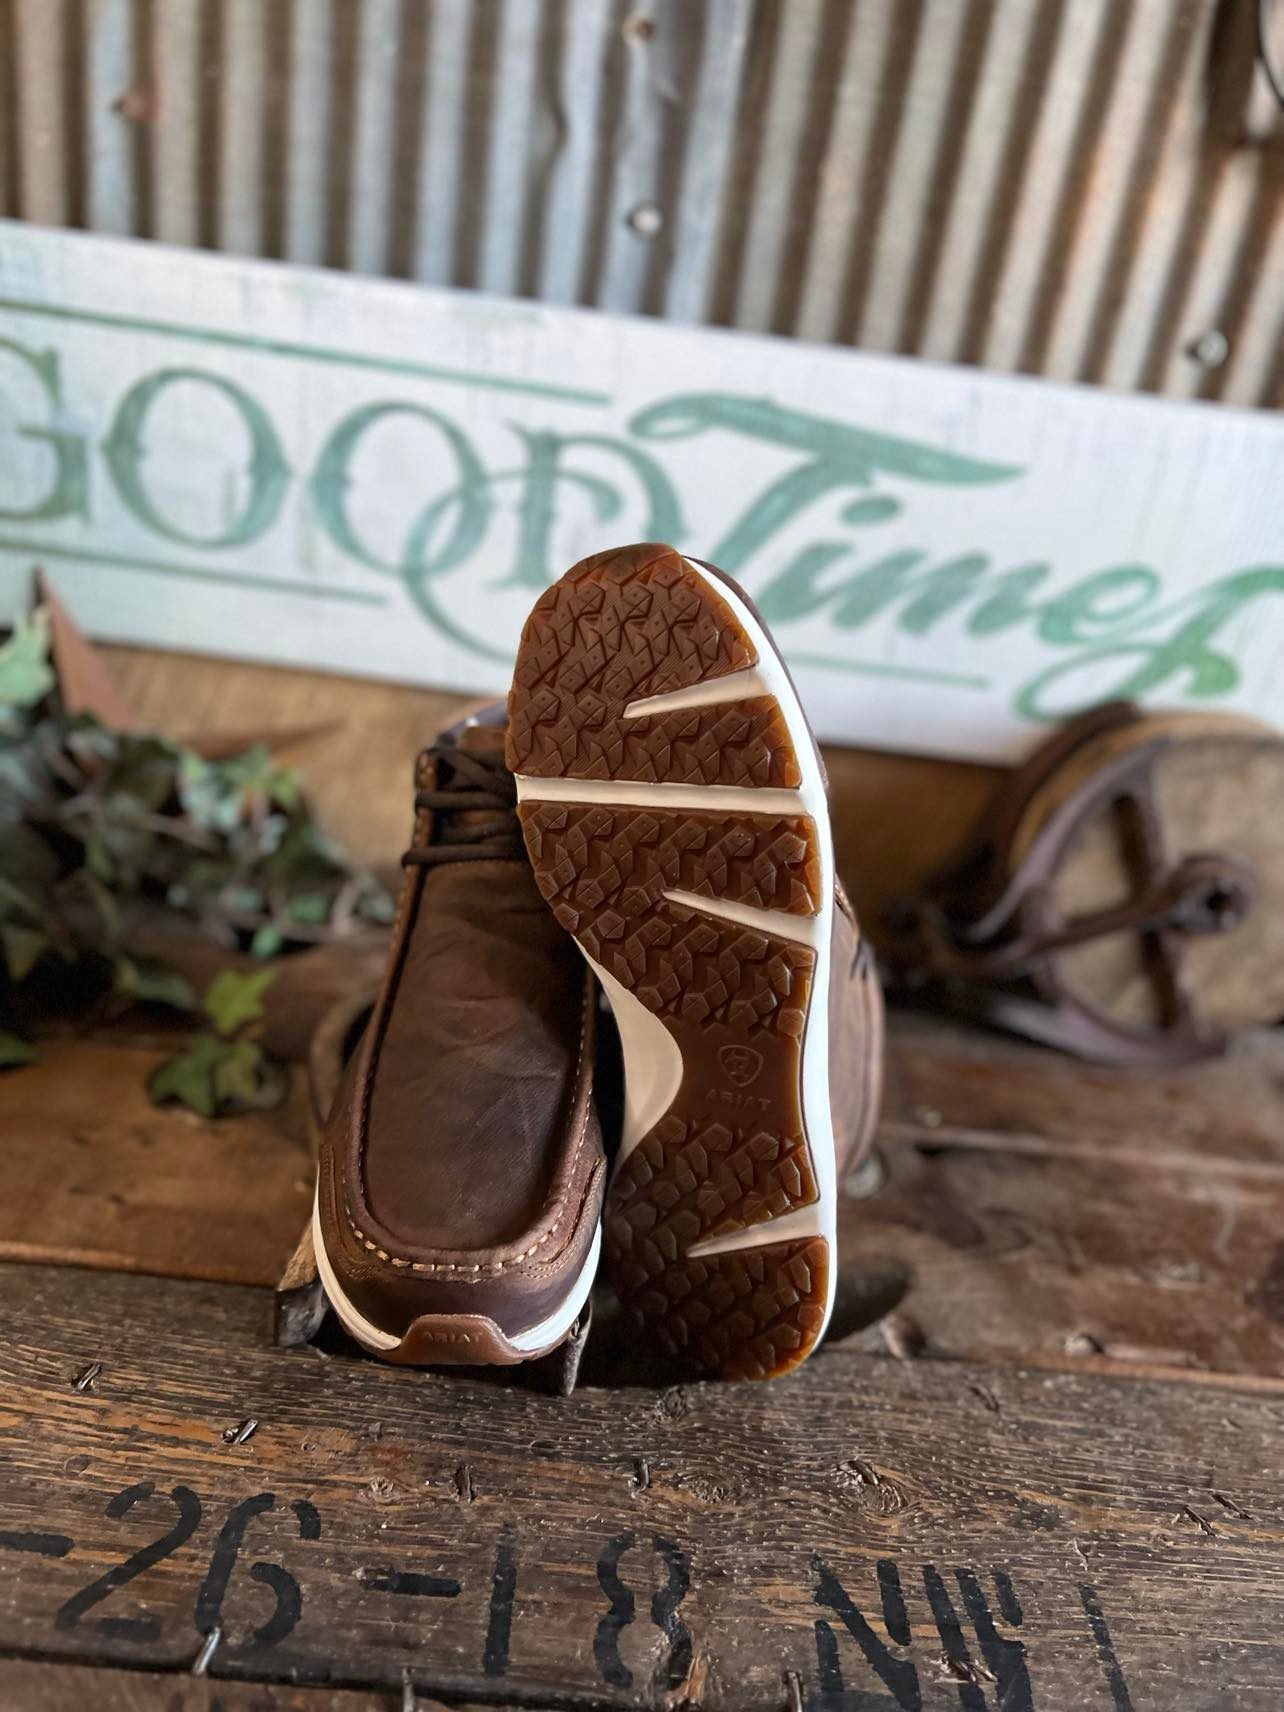 Men's Ariat Spitfire Shoes in Sorrel Crunch-Men's Casual Shoes-Ariat-Lucky J Boots & More, Women's, Men's, & Kids Western Store Located in Carthage, MO